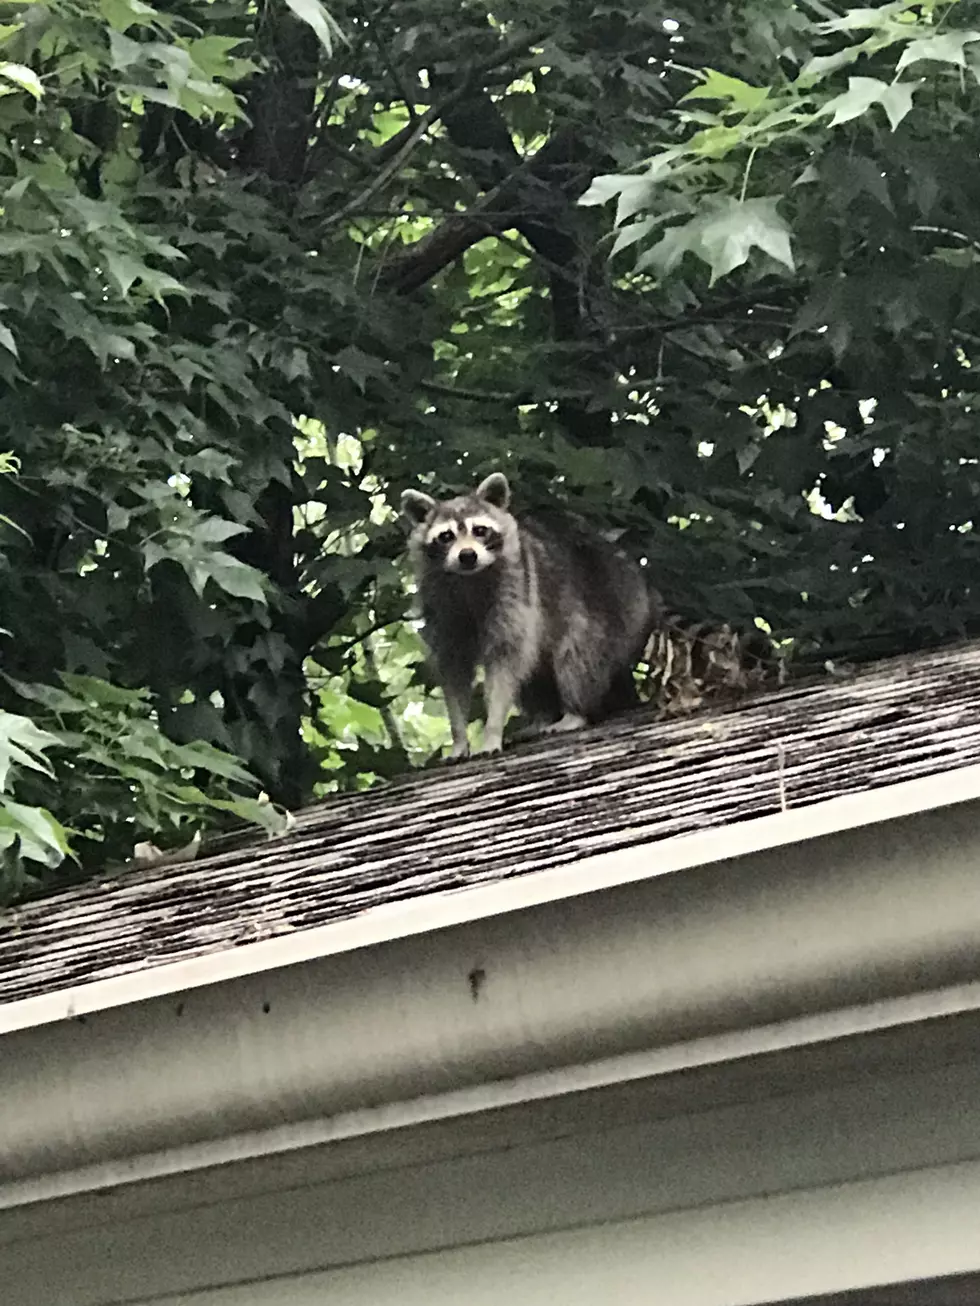 [Update] Liberty’s House has been Taken Over by Raccoons!